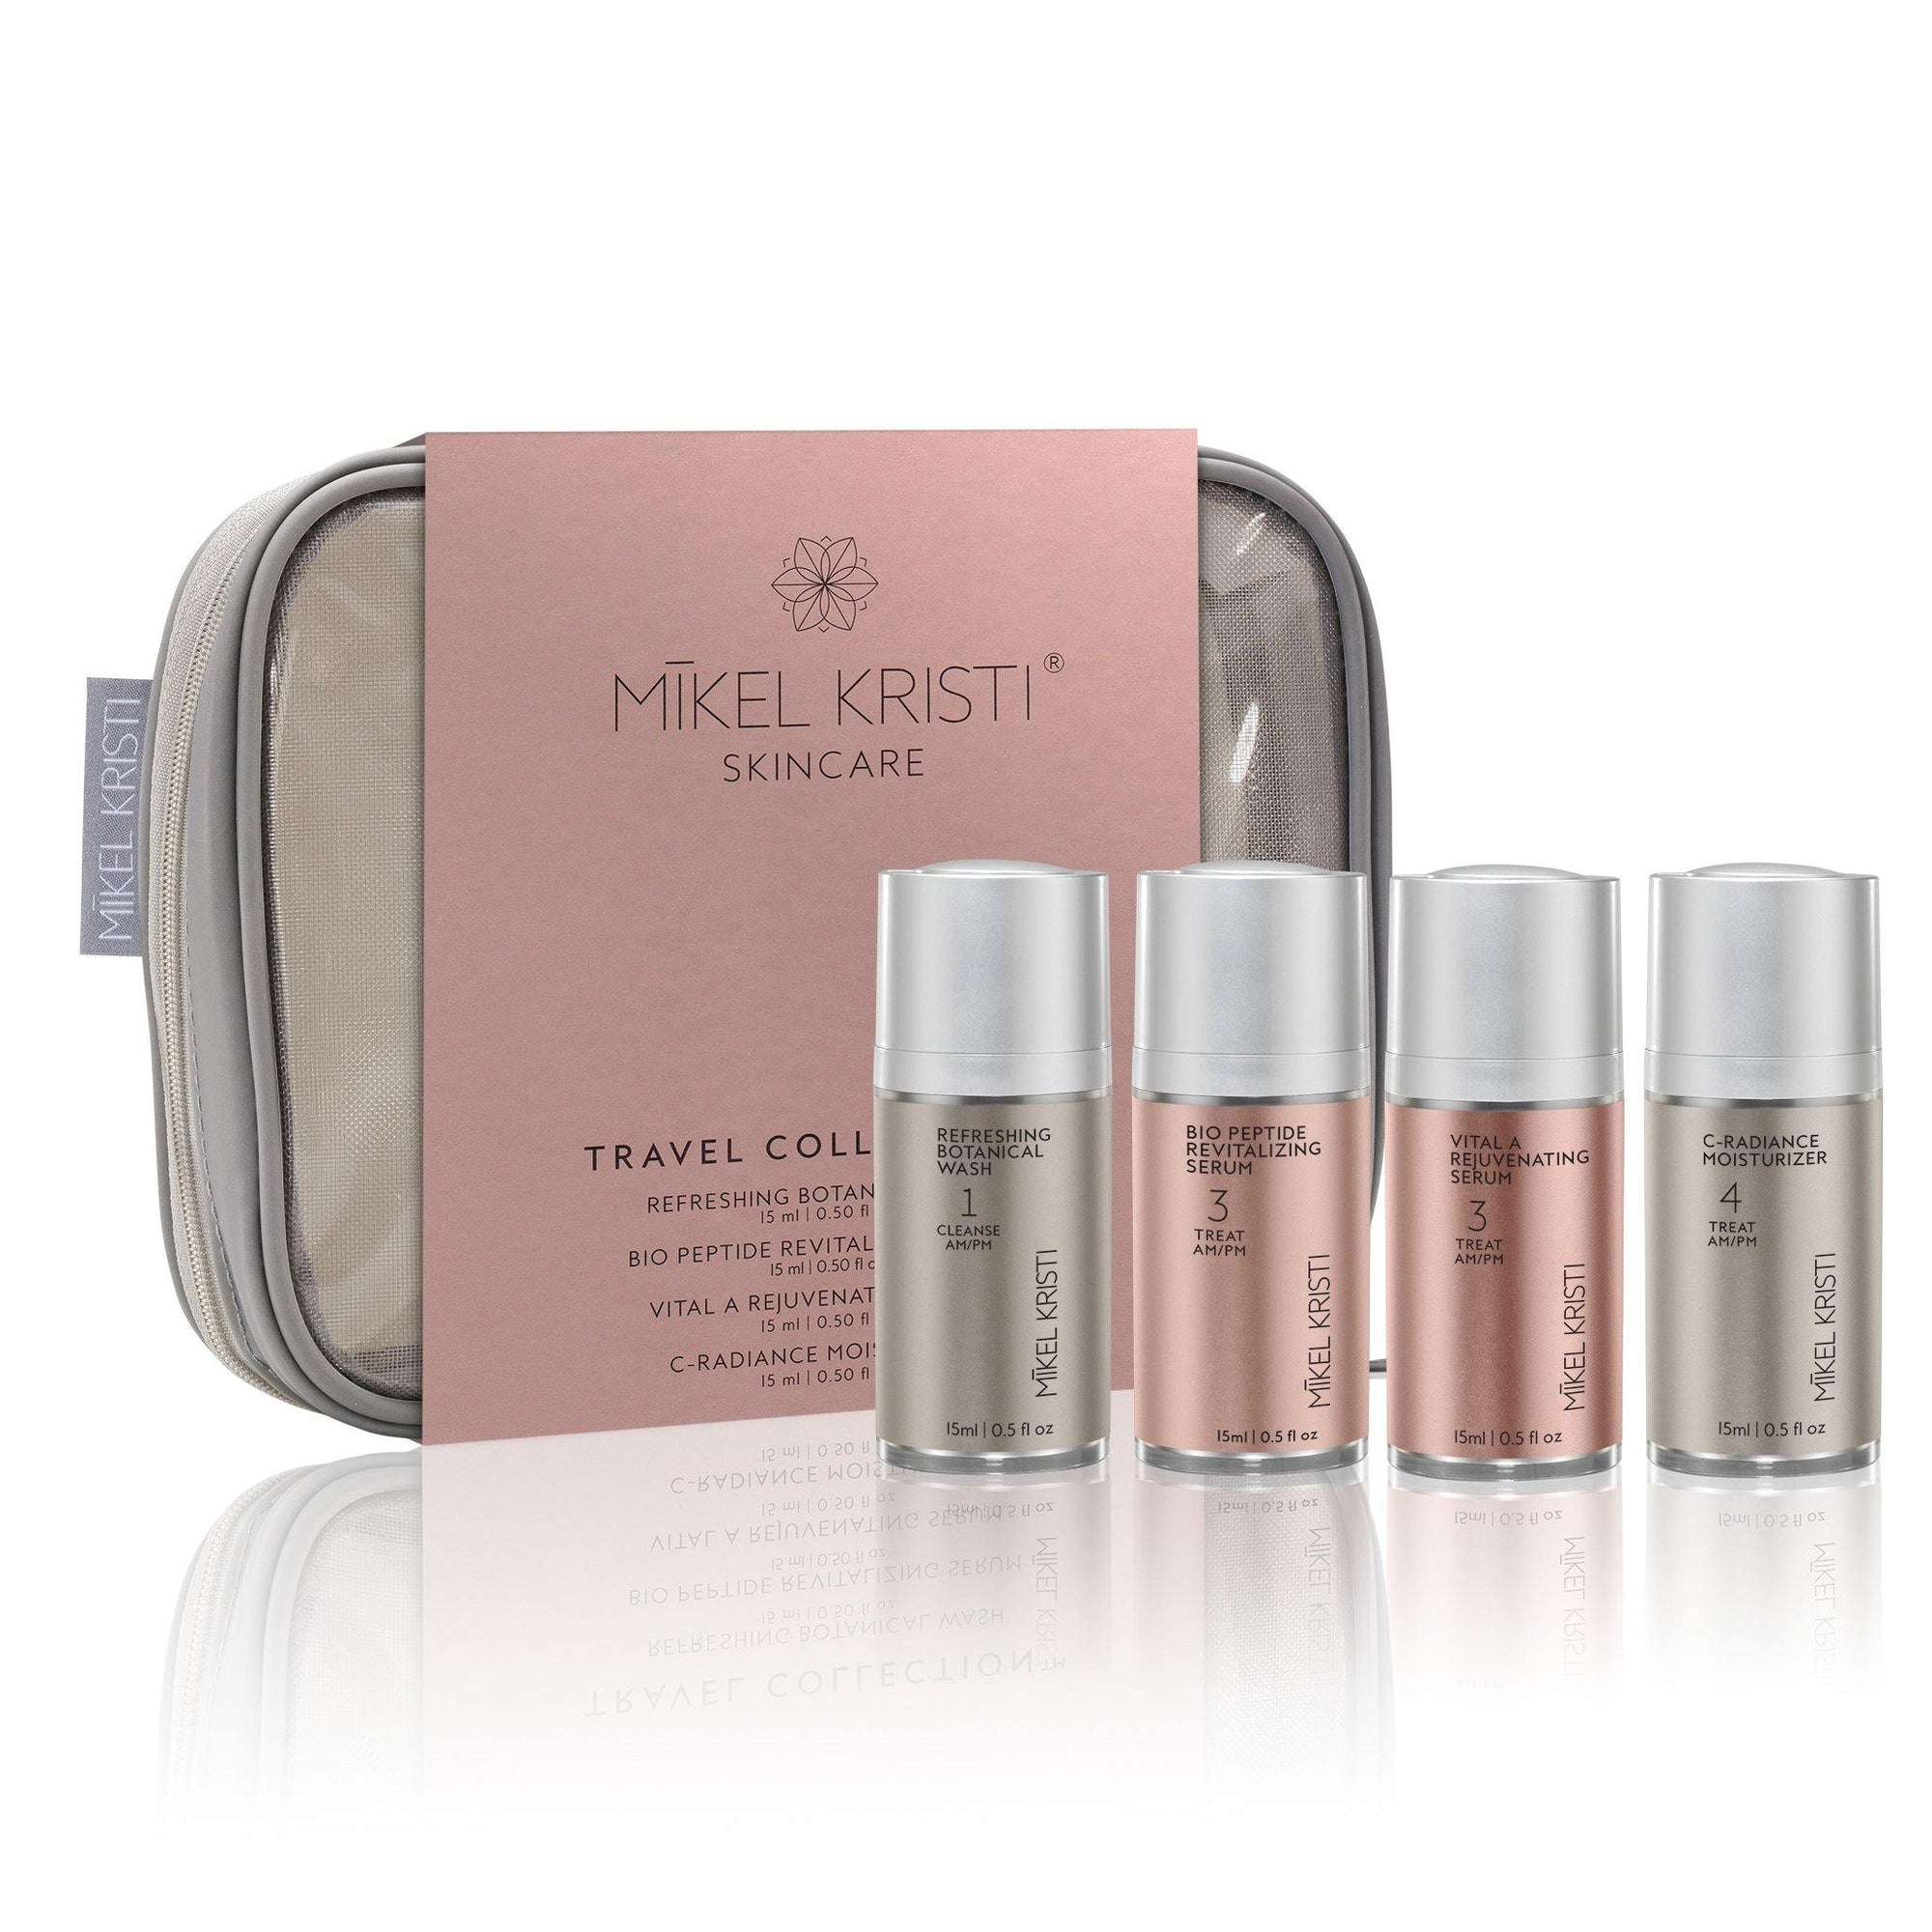 Travel Collection by Mikel Kristi in gray, TSA ready travel toiletry bag, facial wash, 2 serums, and moisturizer